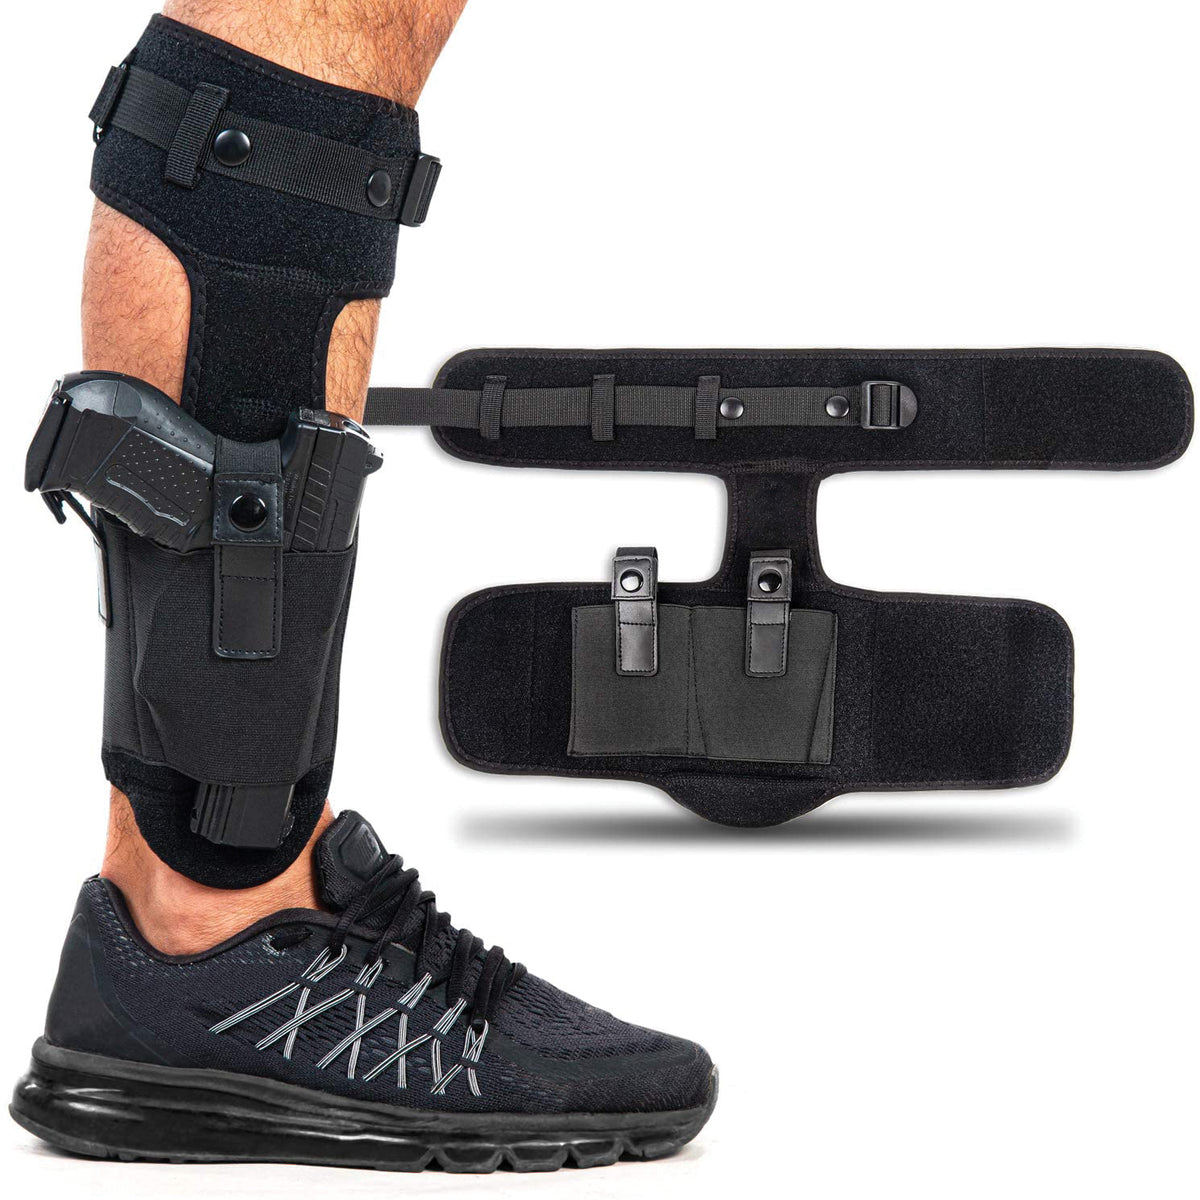 2Tactic Ankle Holster